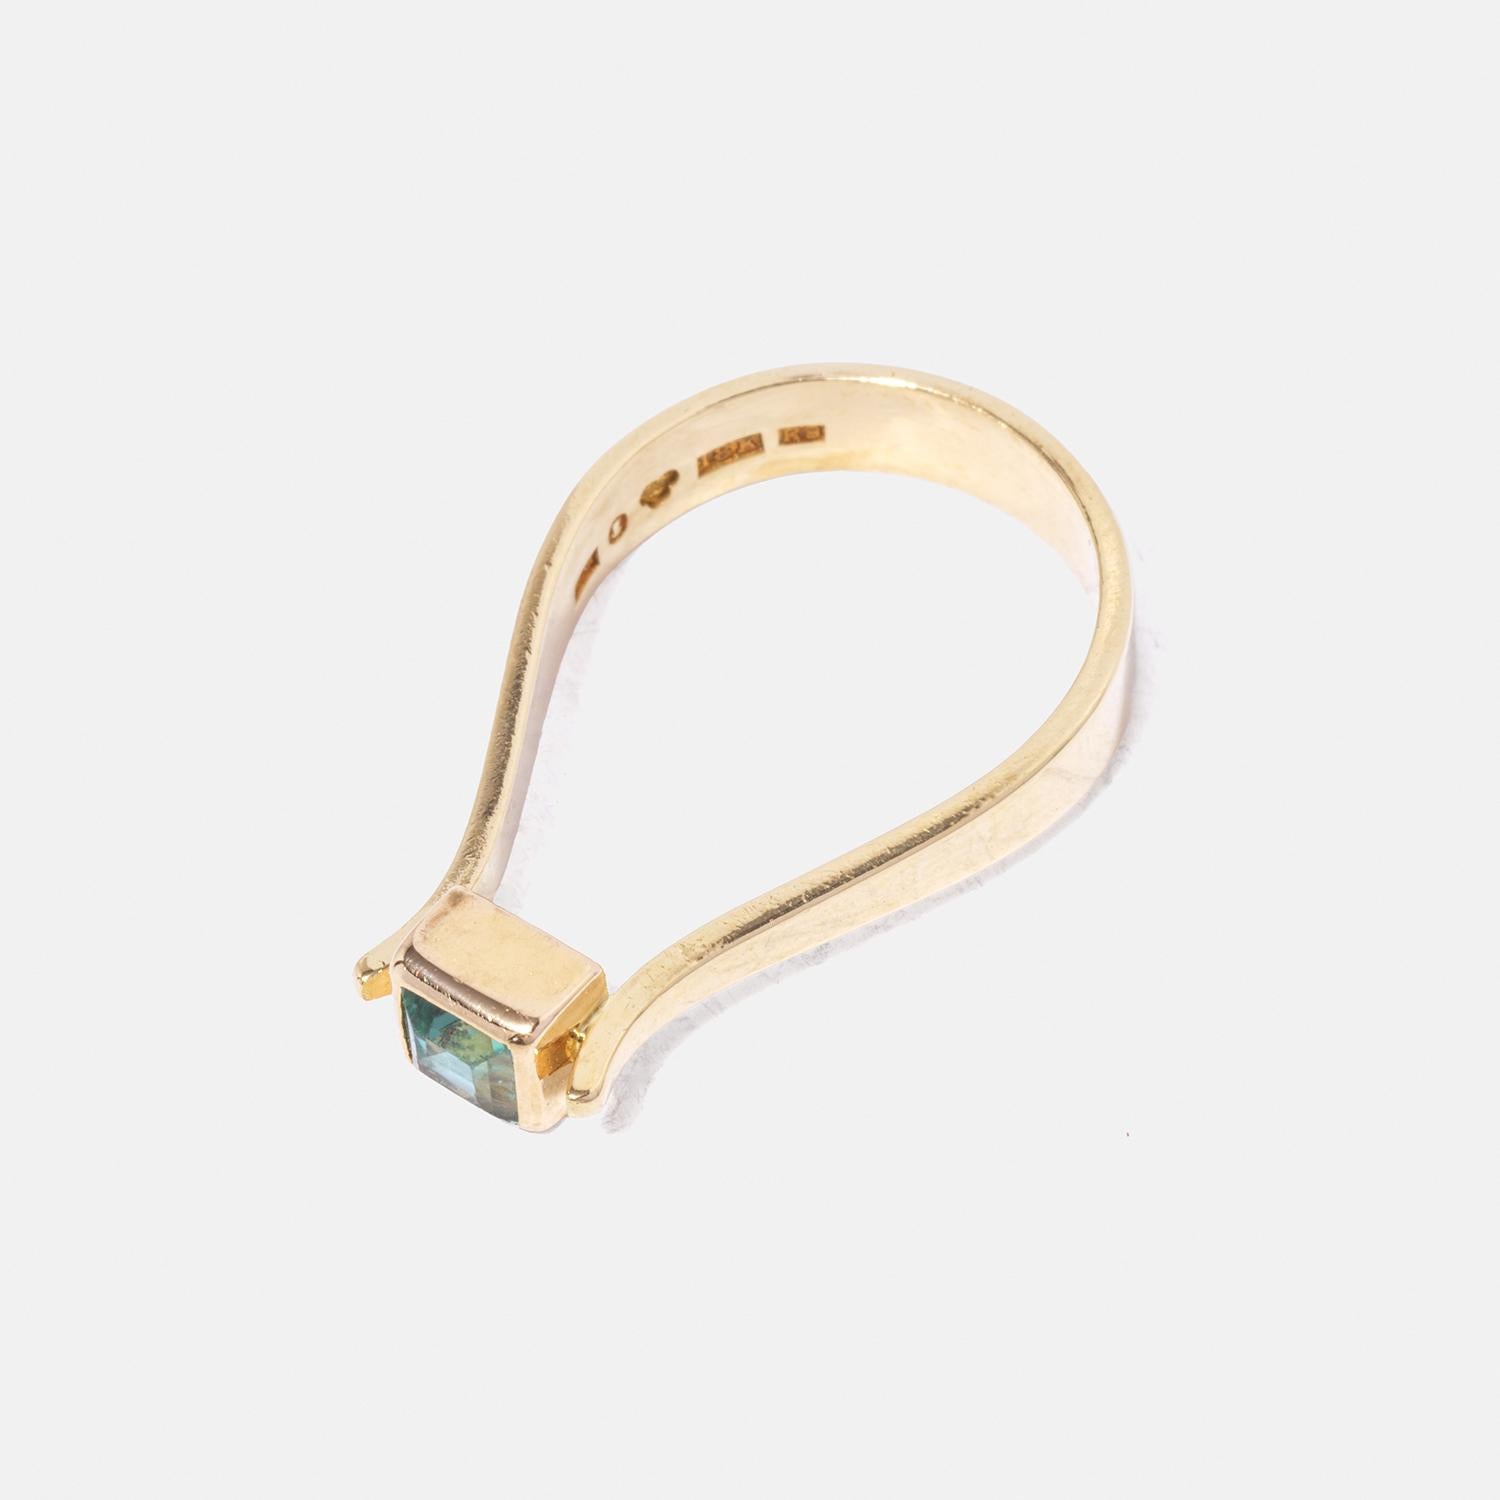 This is an 18-karat gold ring featuring a square green tourmaline. The band has an unusual shape, almost like a loop, giving it a unique and modern appearance. The setting for the tourmaline is simple yet elegant, enhancing the stone's vibrant